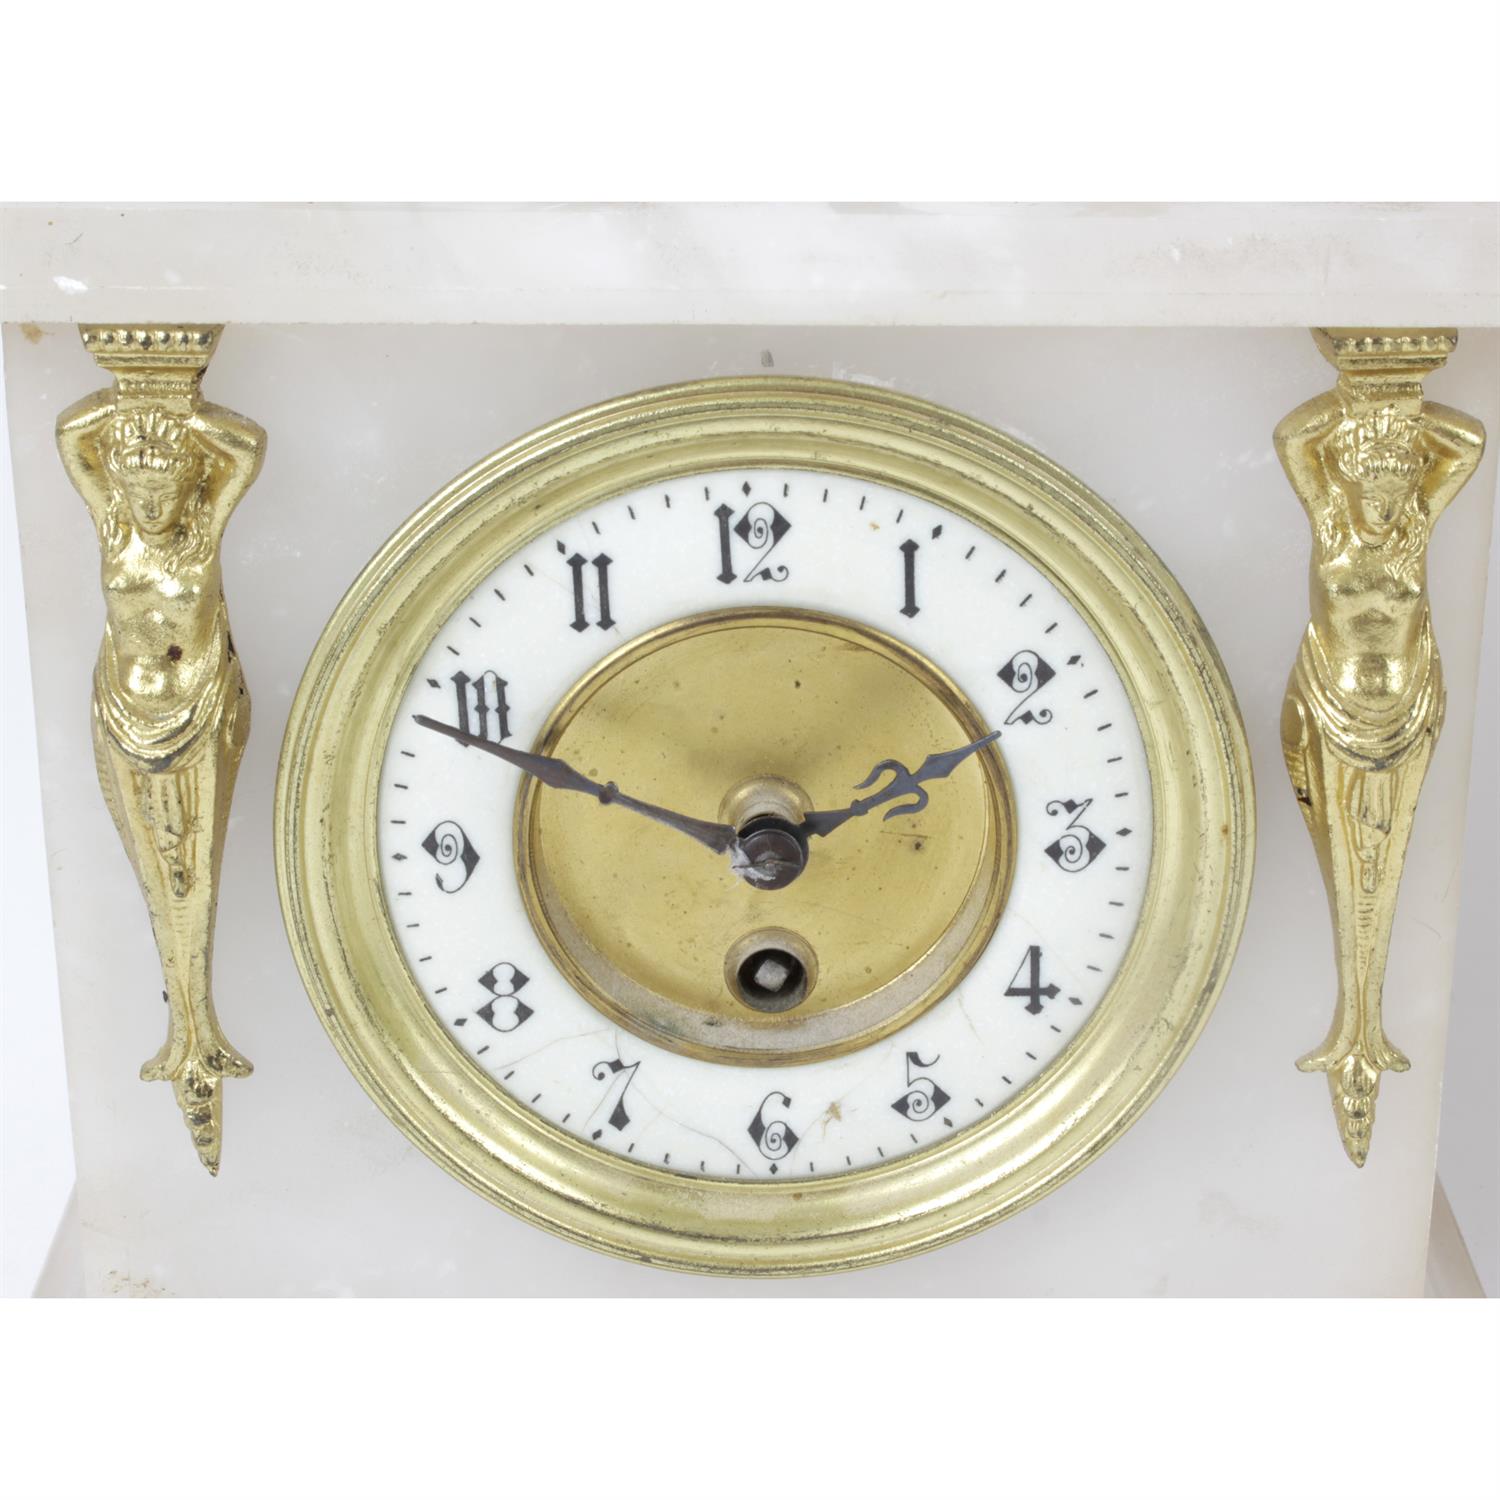 Two 20th century mantel clocks with gilt lion finials - Image 2 of 4